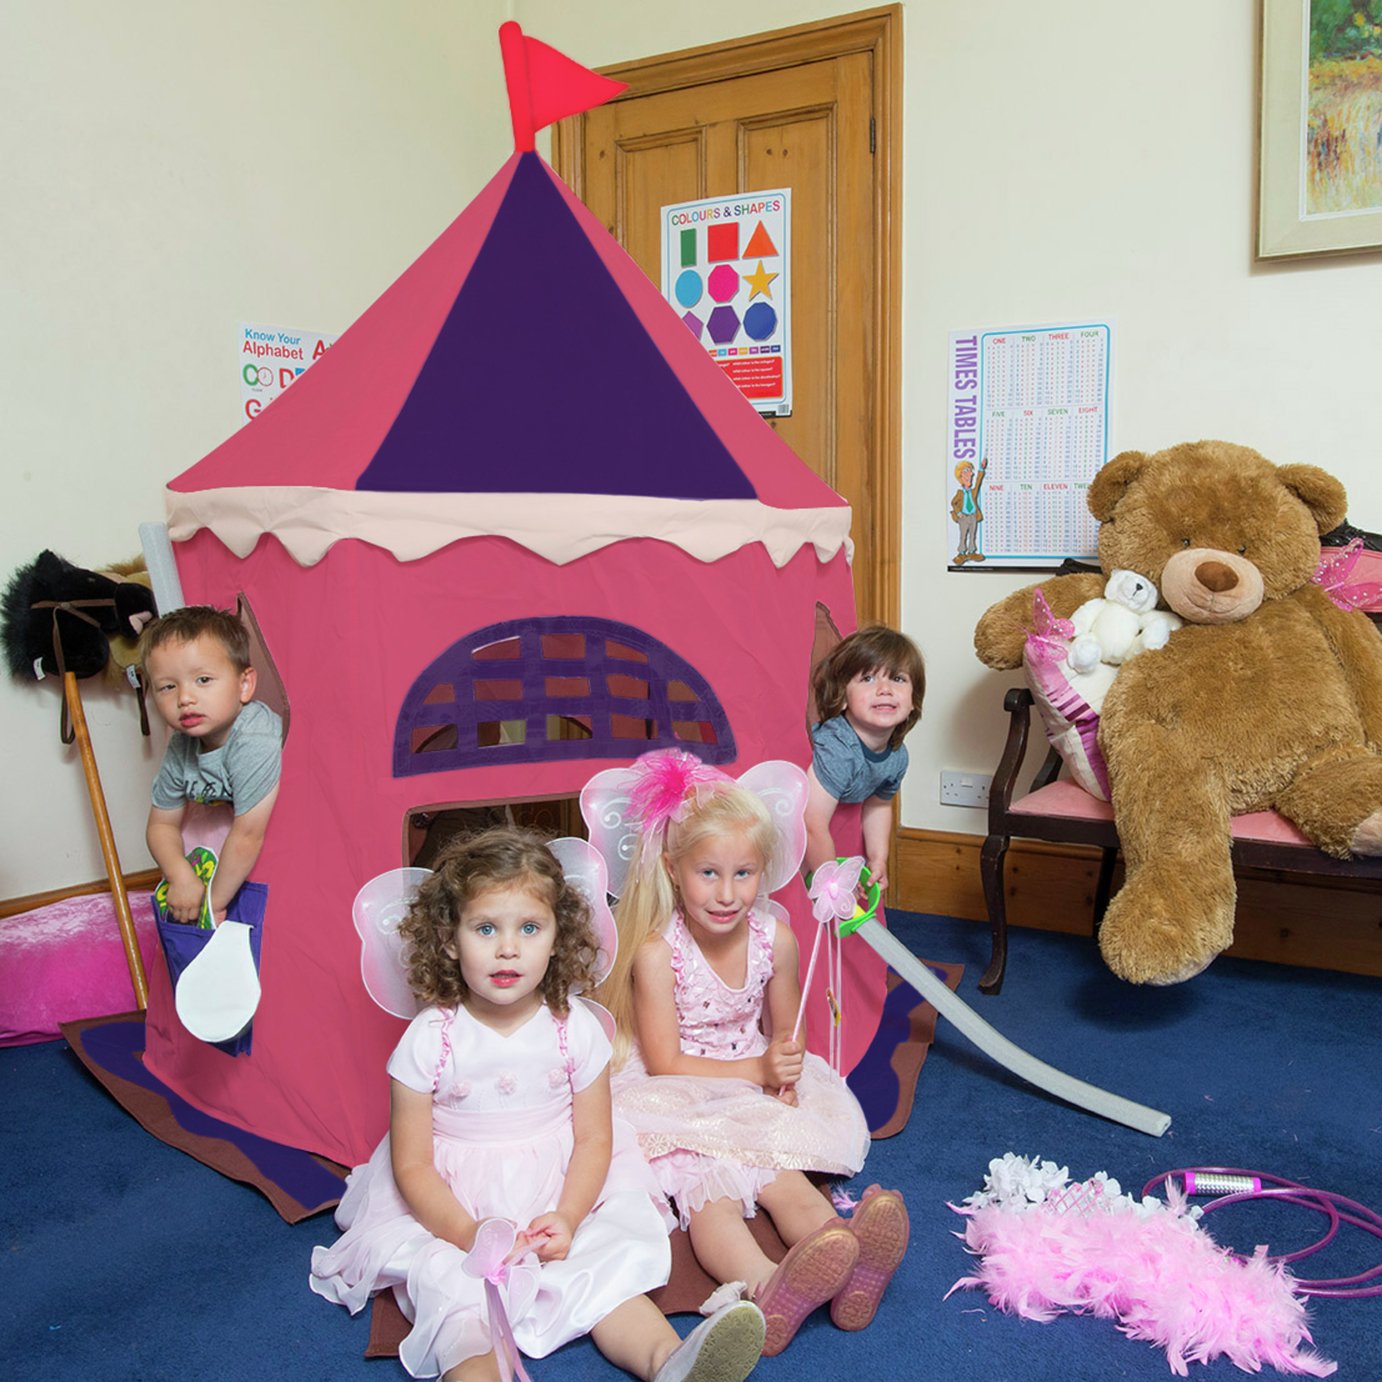 Bazoongi Princess Fairy Castle Play Tent Review